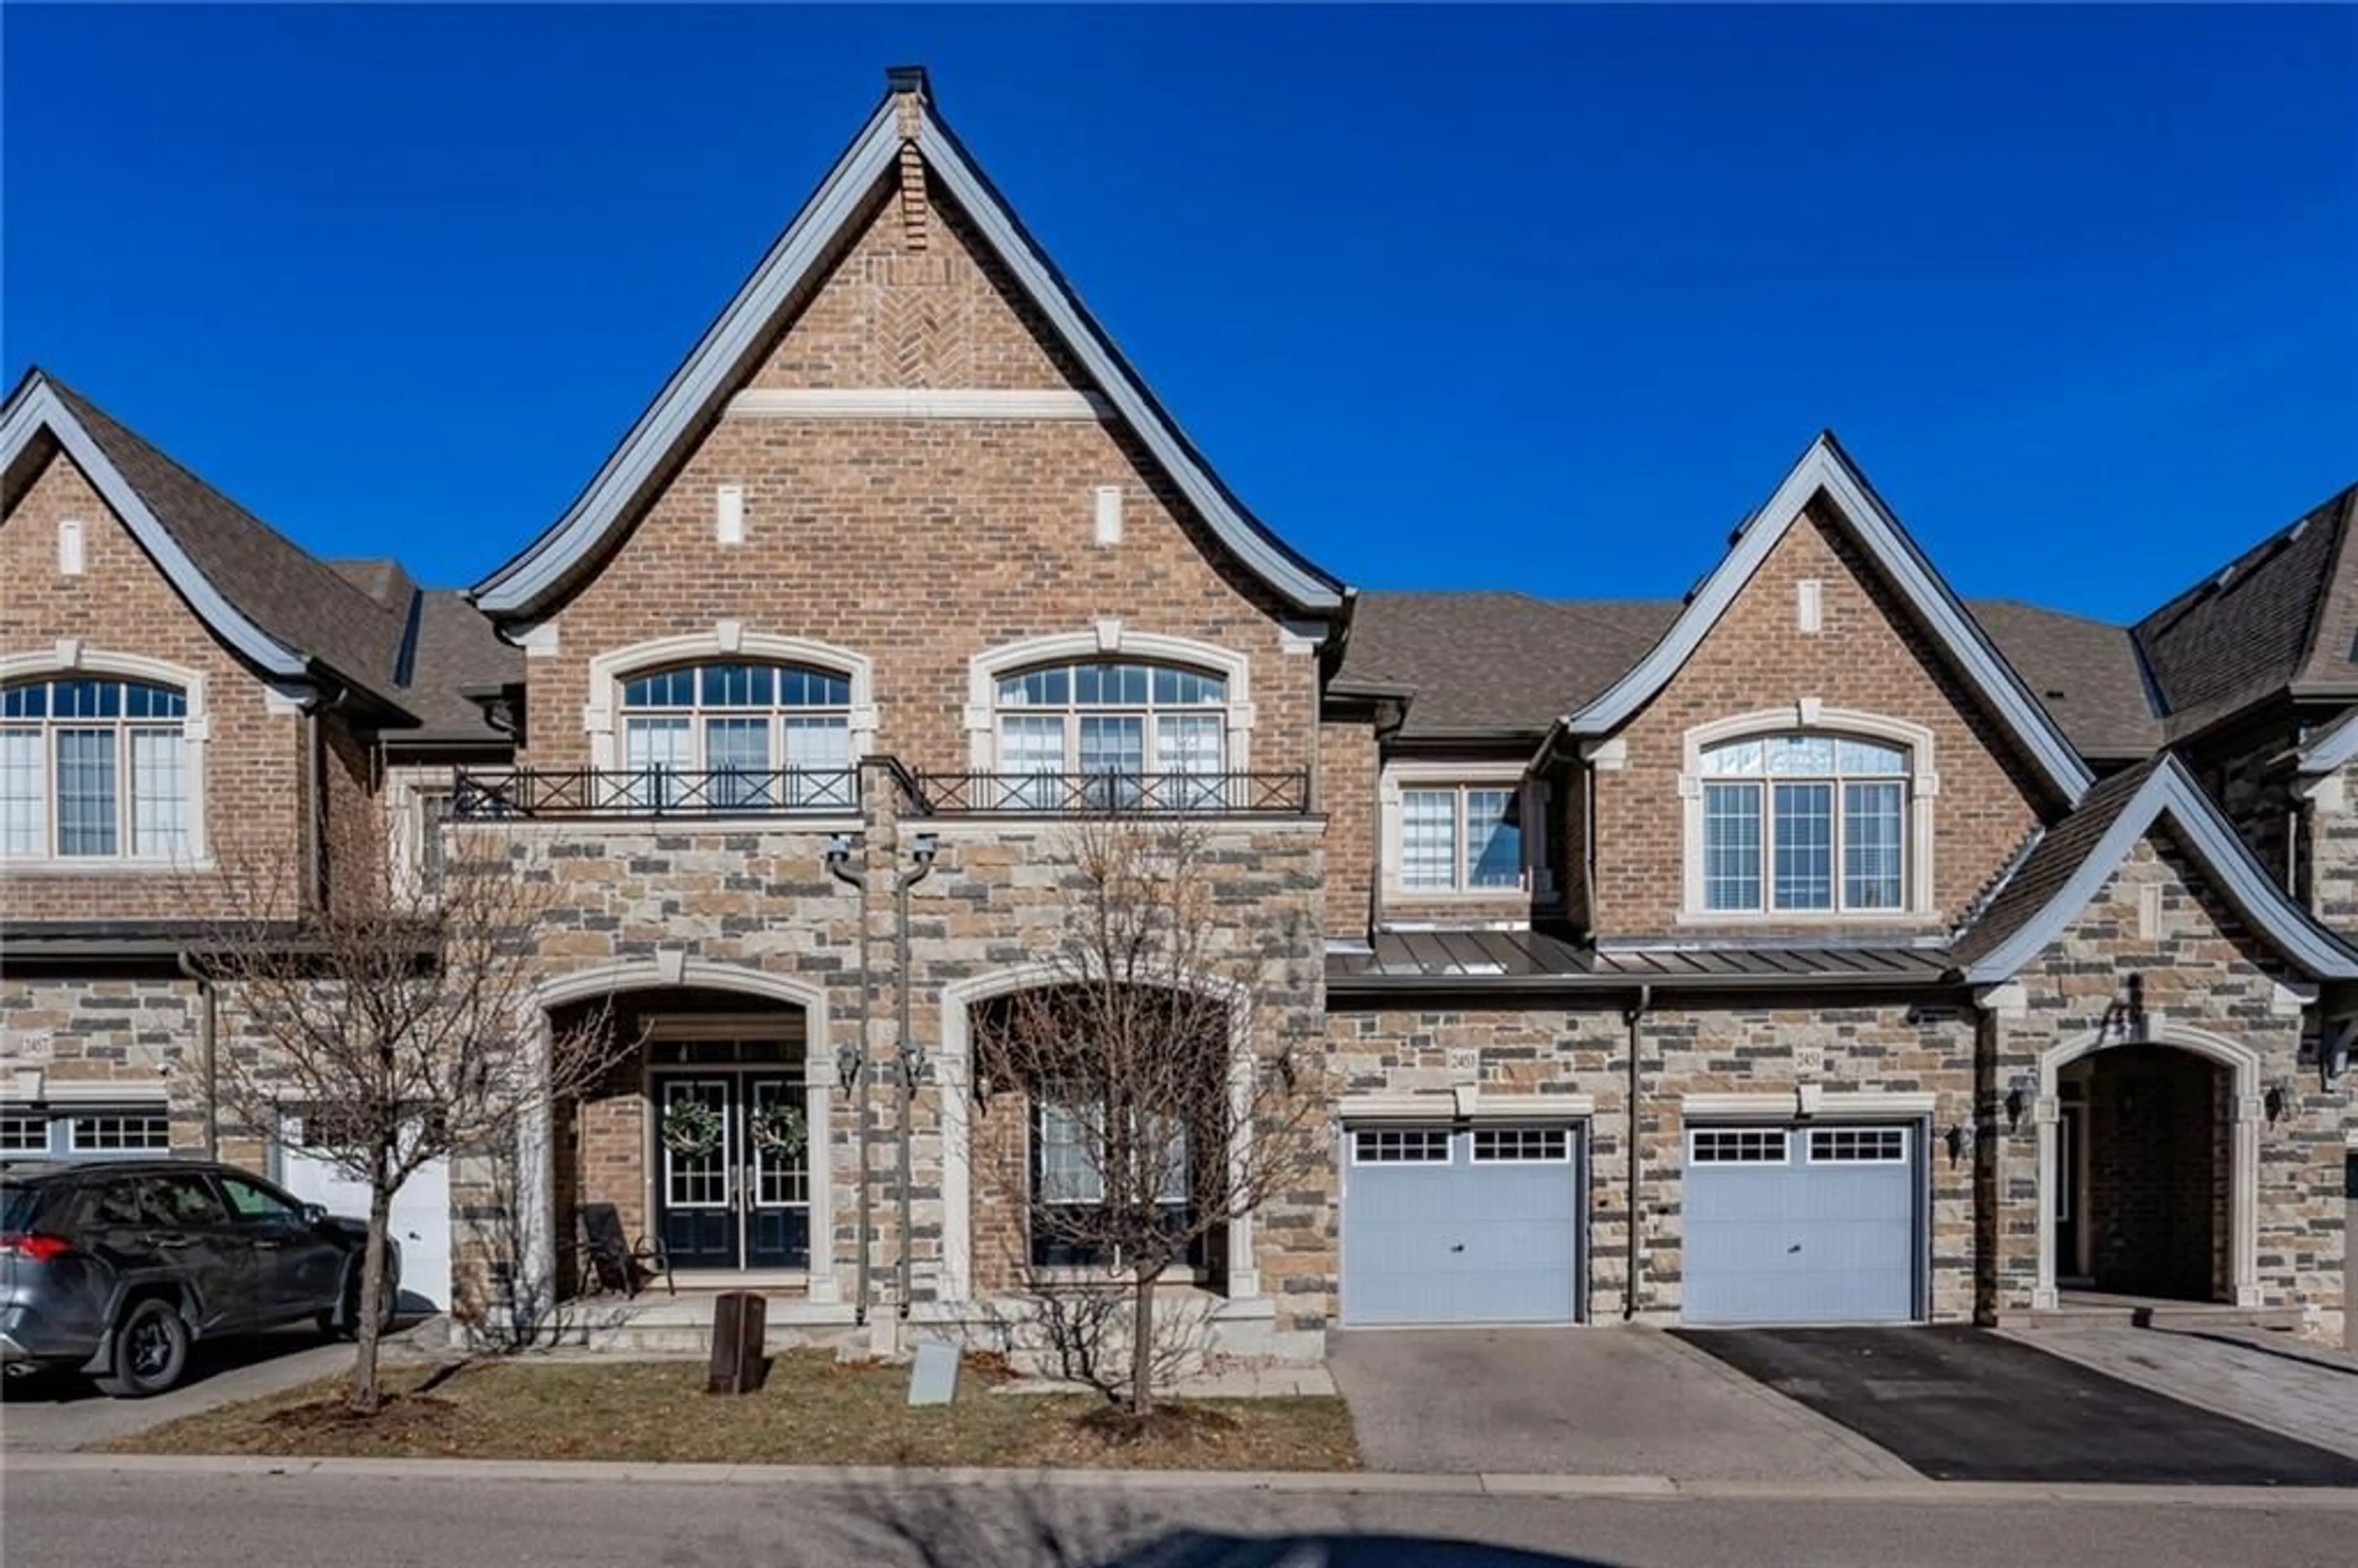 Home with brick exterior material for 2453 Village Common, Oakville Ontario L6M 0S2